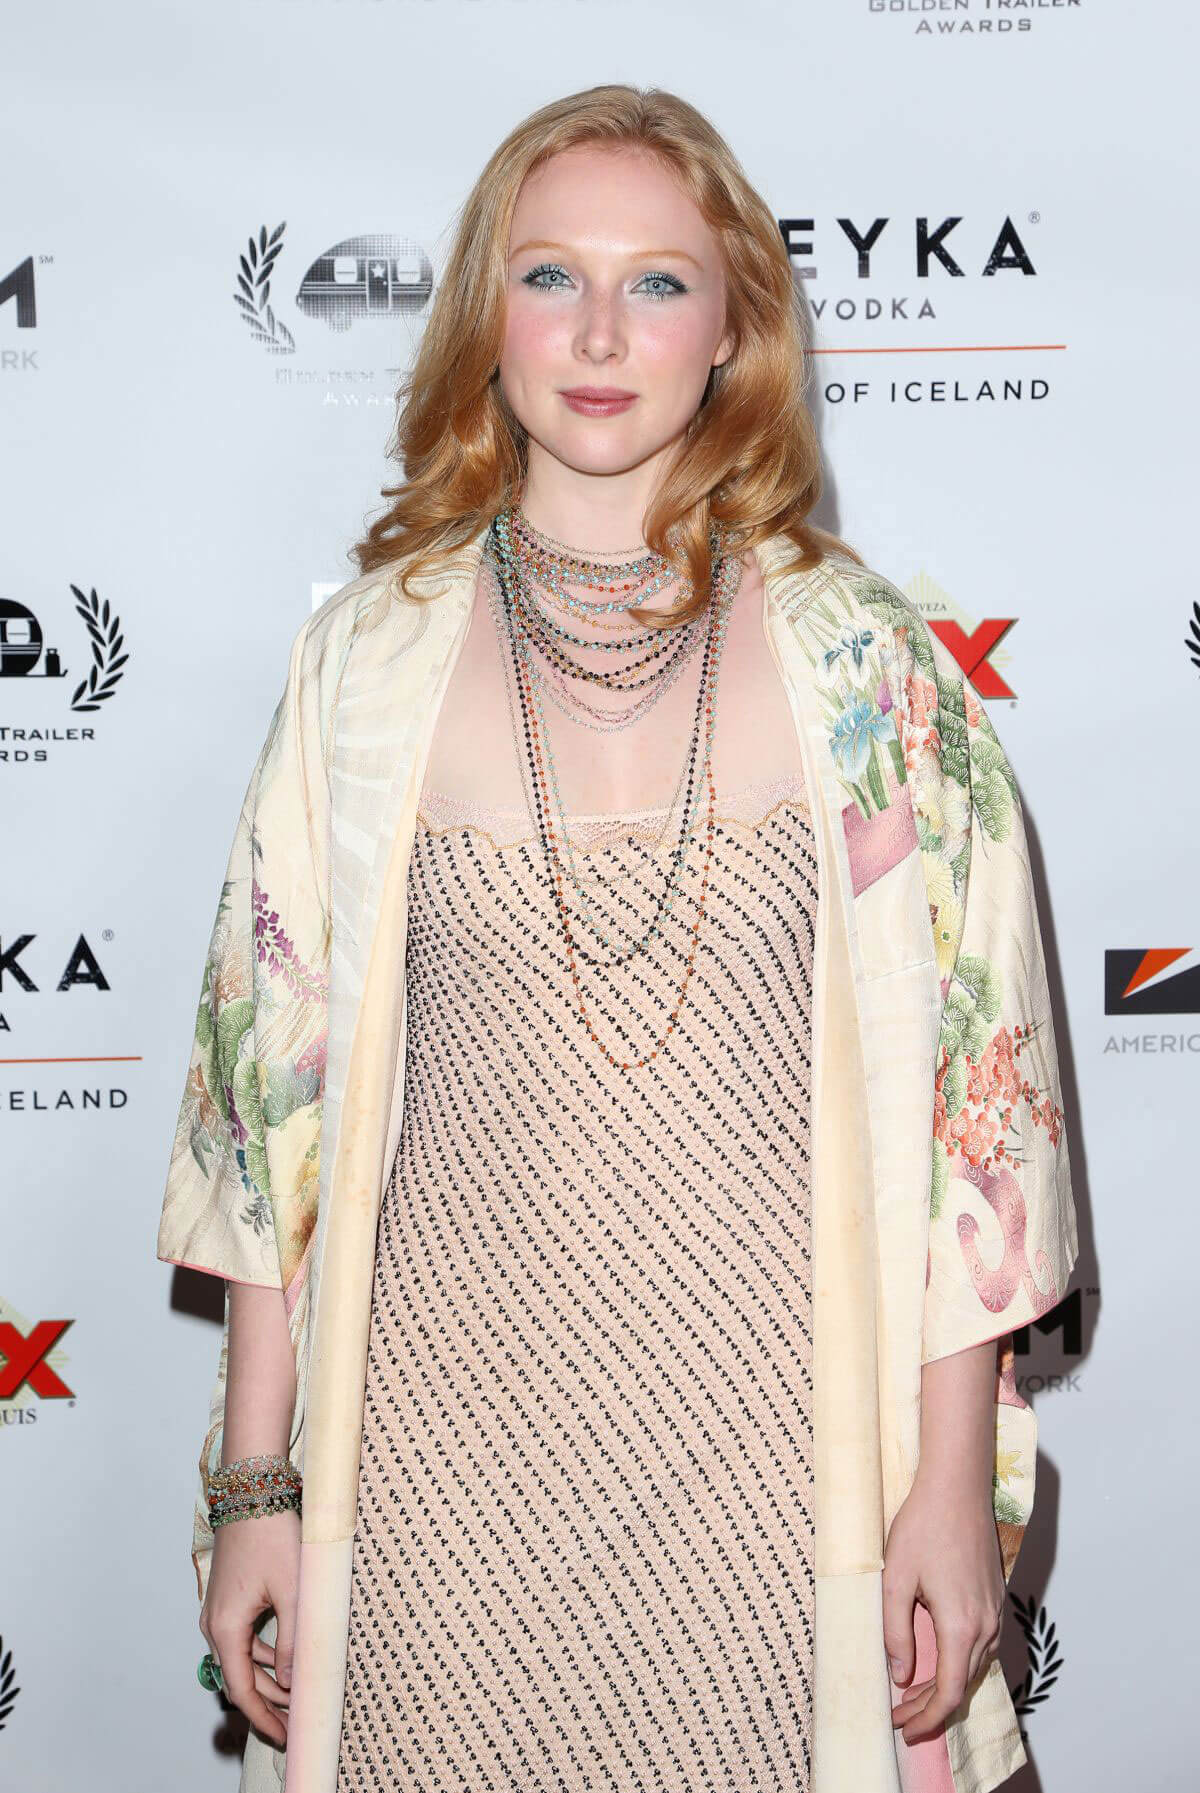 Molly Quinn at 18th Annual Golden Trailer Awards in Beverly Hills